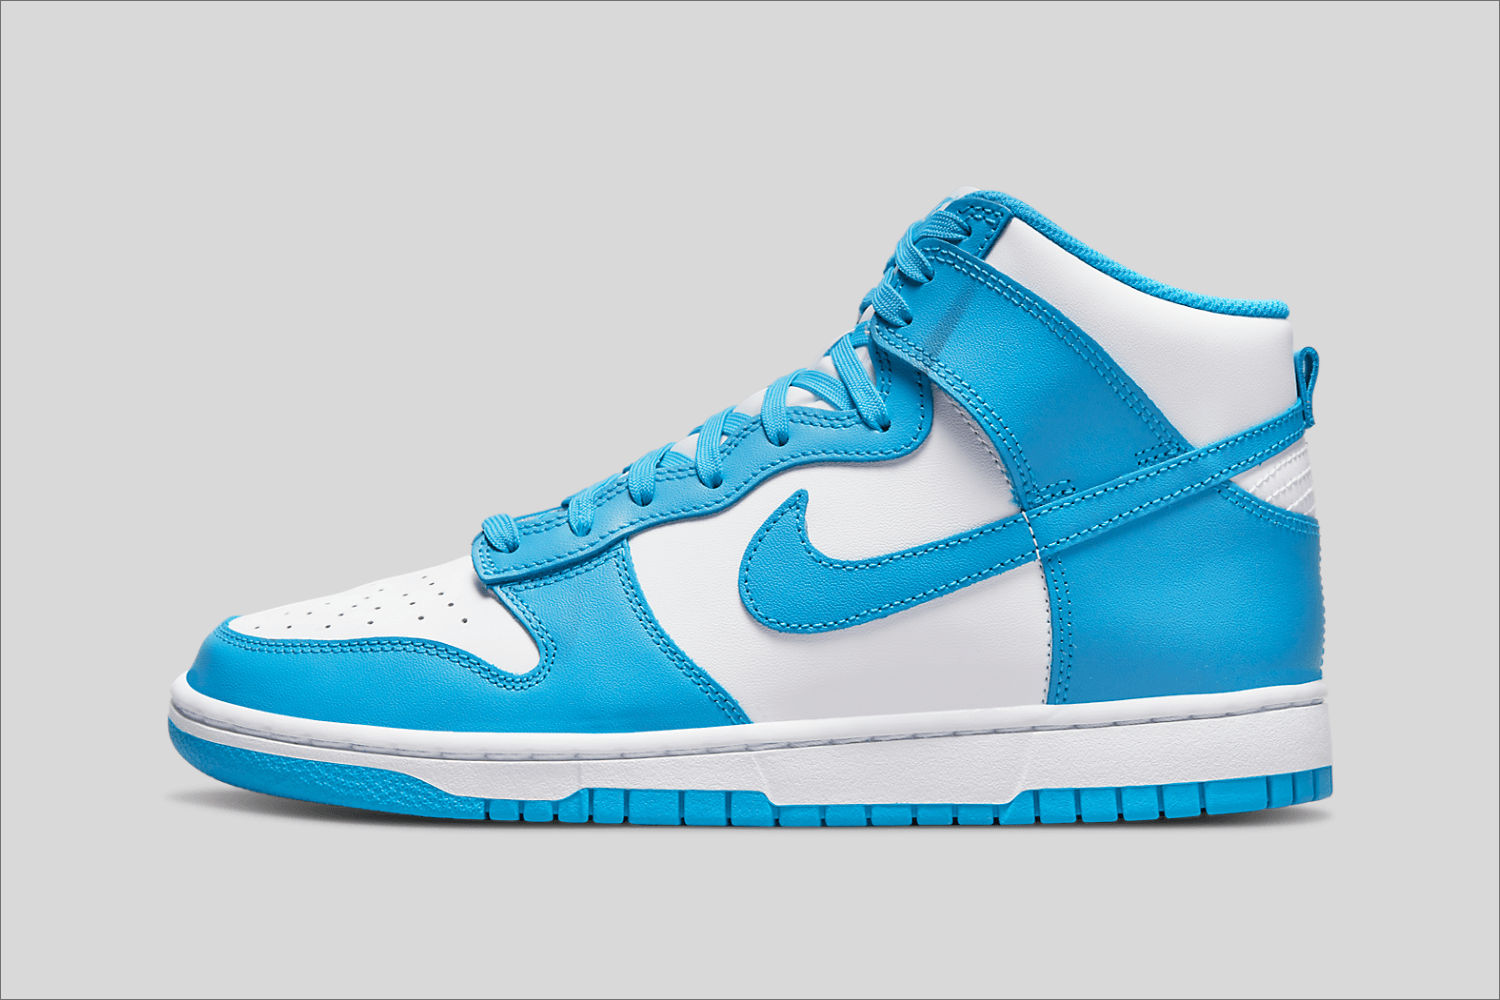 A Nike Dunk High 'Laser Blue' will release soon